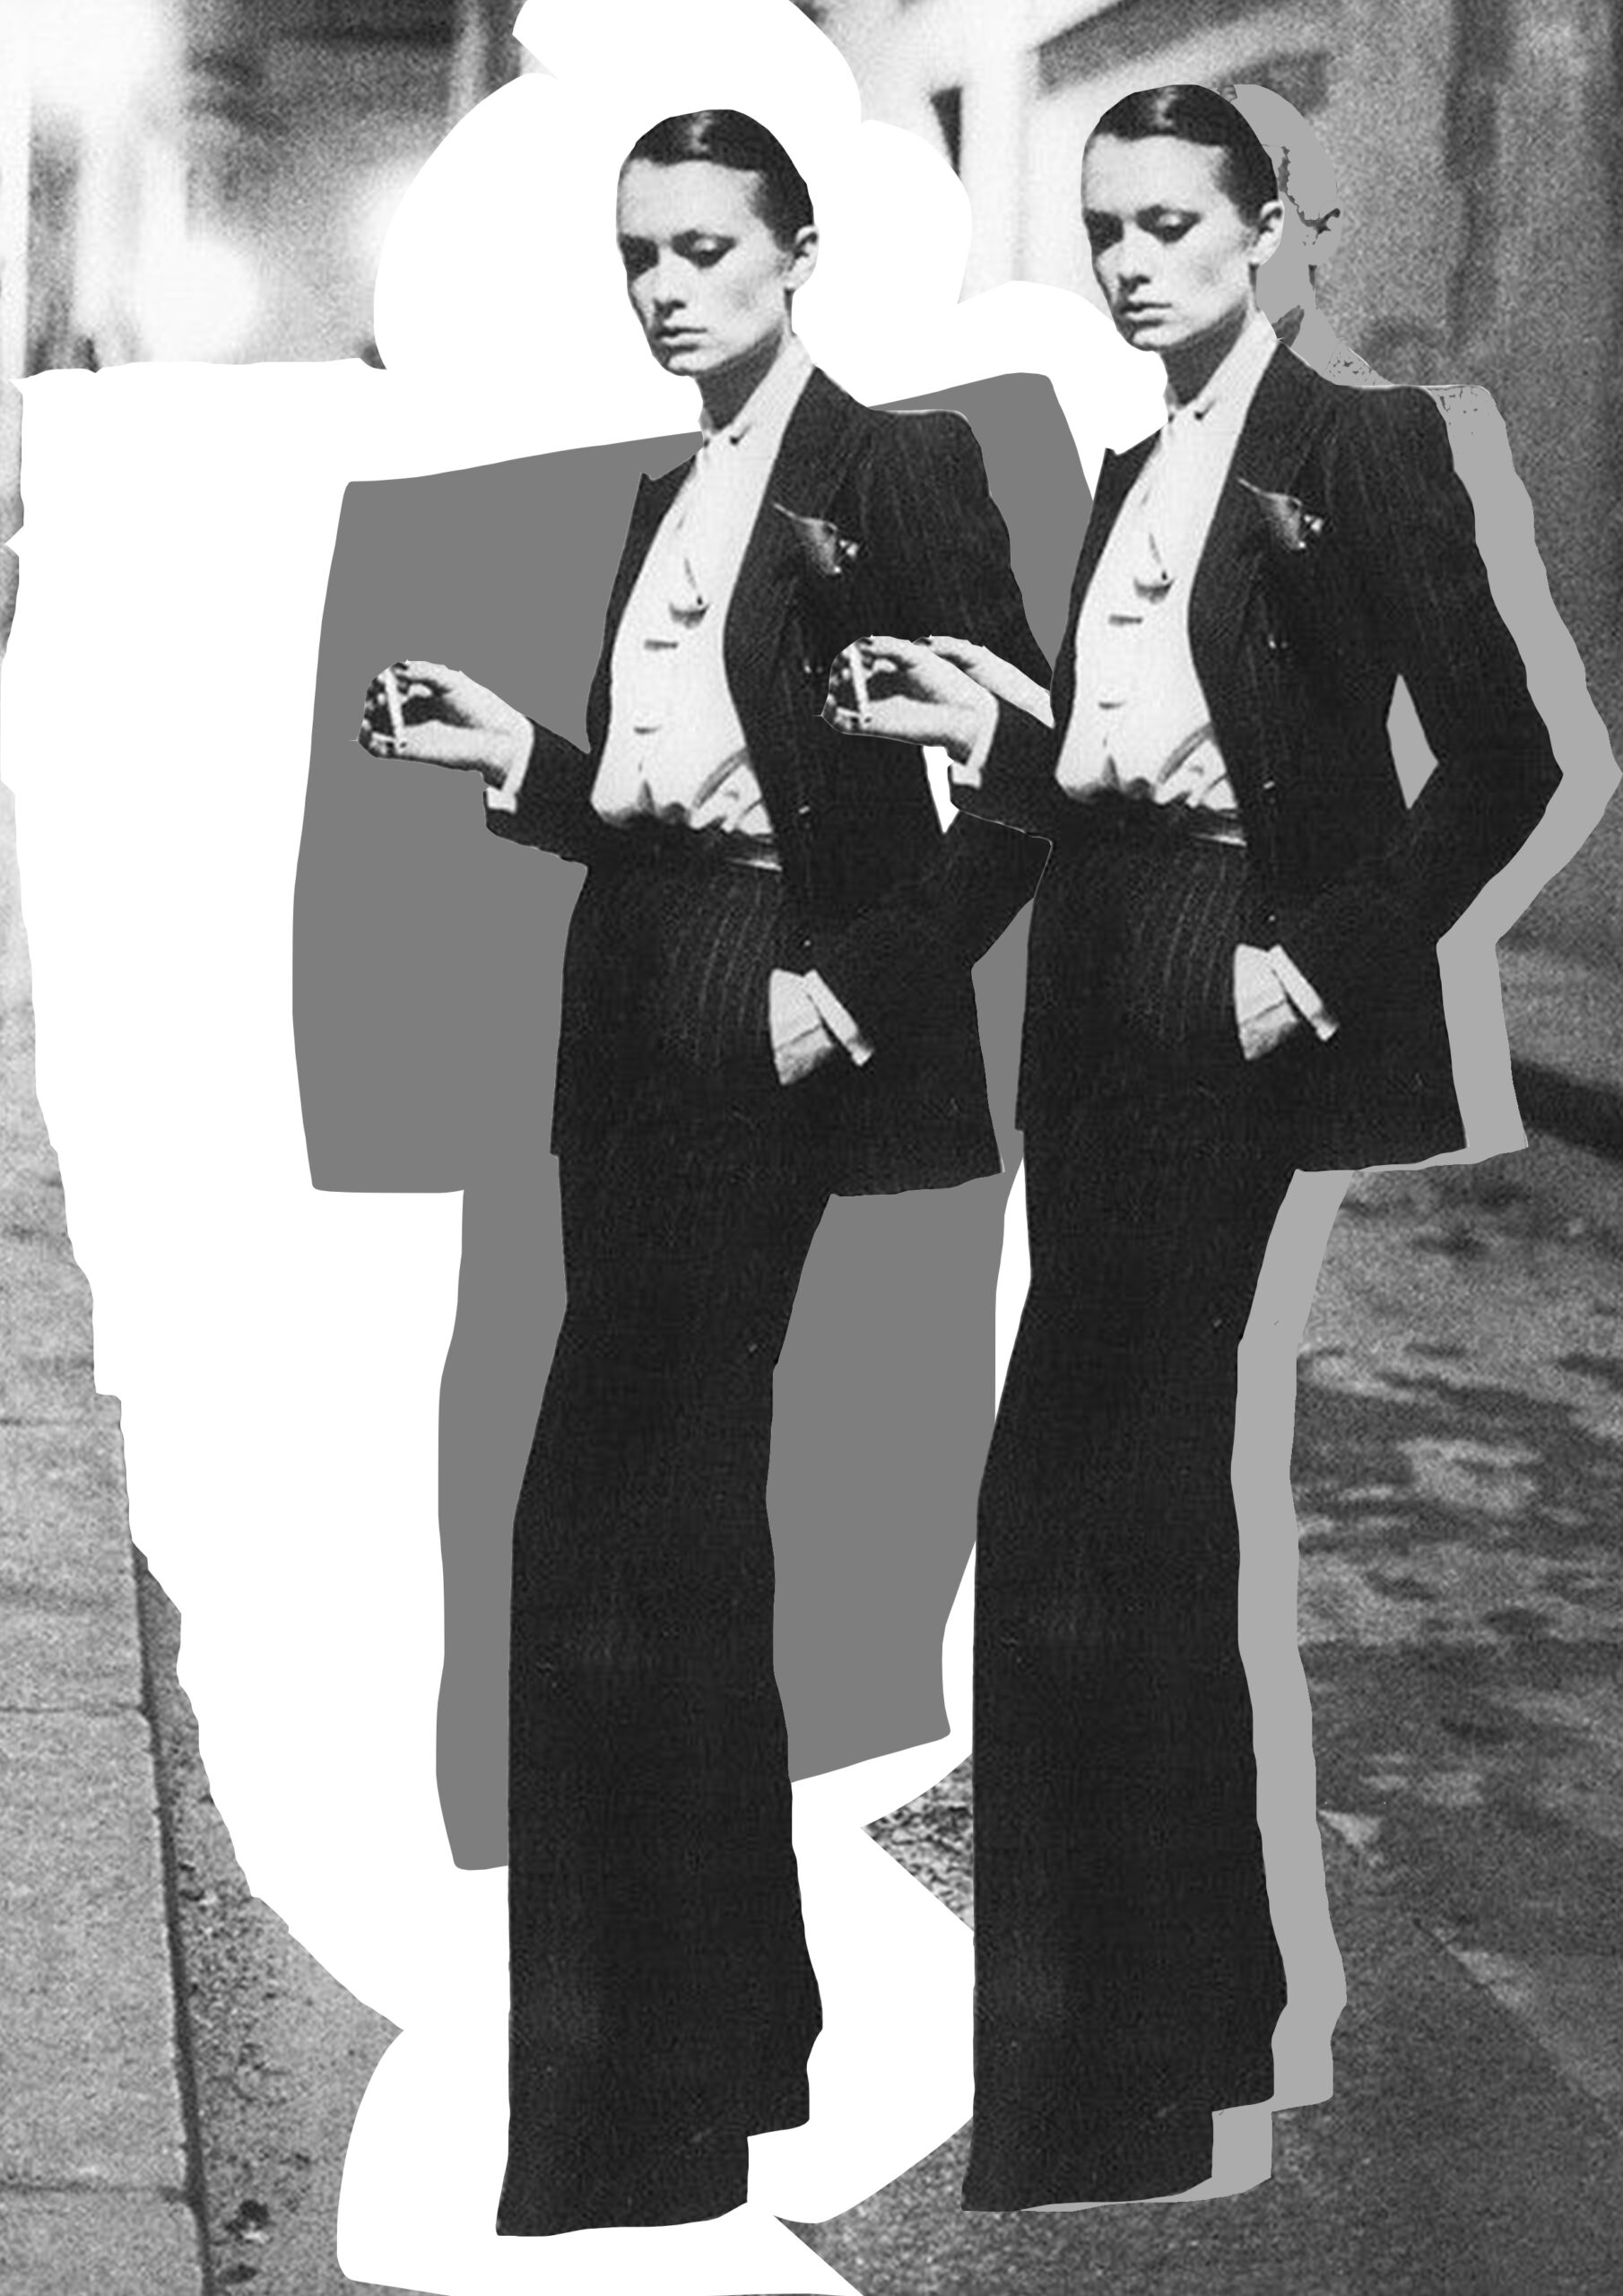 Yves Saint Laurent presented his first woman suit in 1966